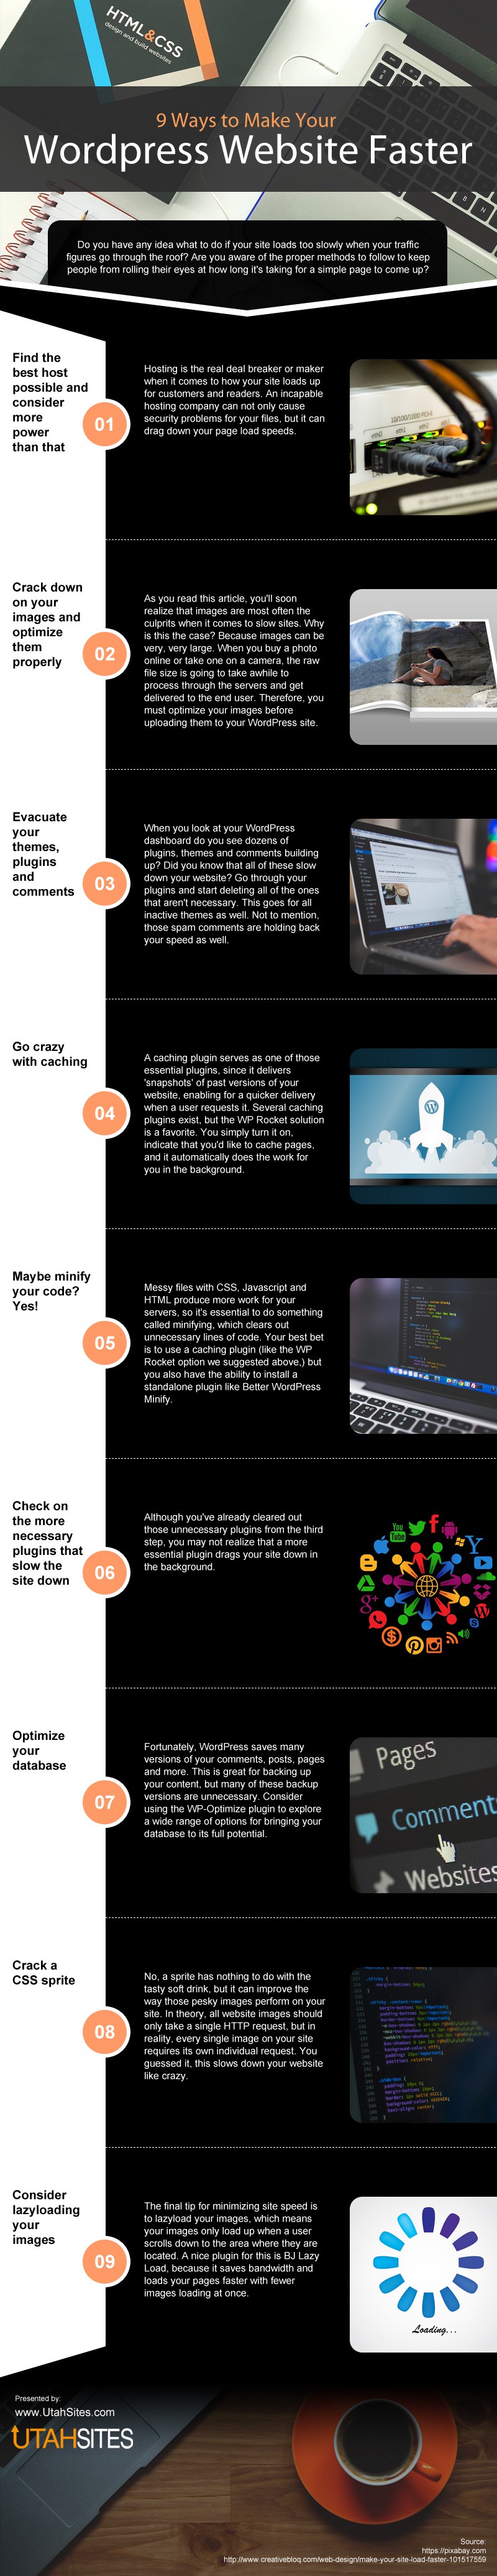 9 Ways to Make your WordPress Website Faster [Infographic]